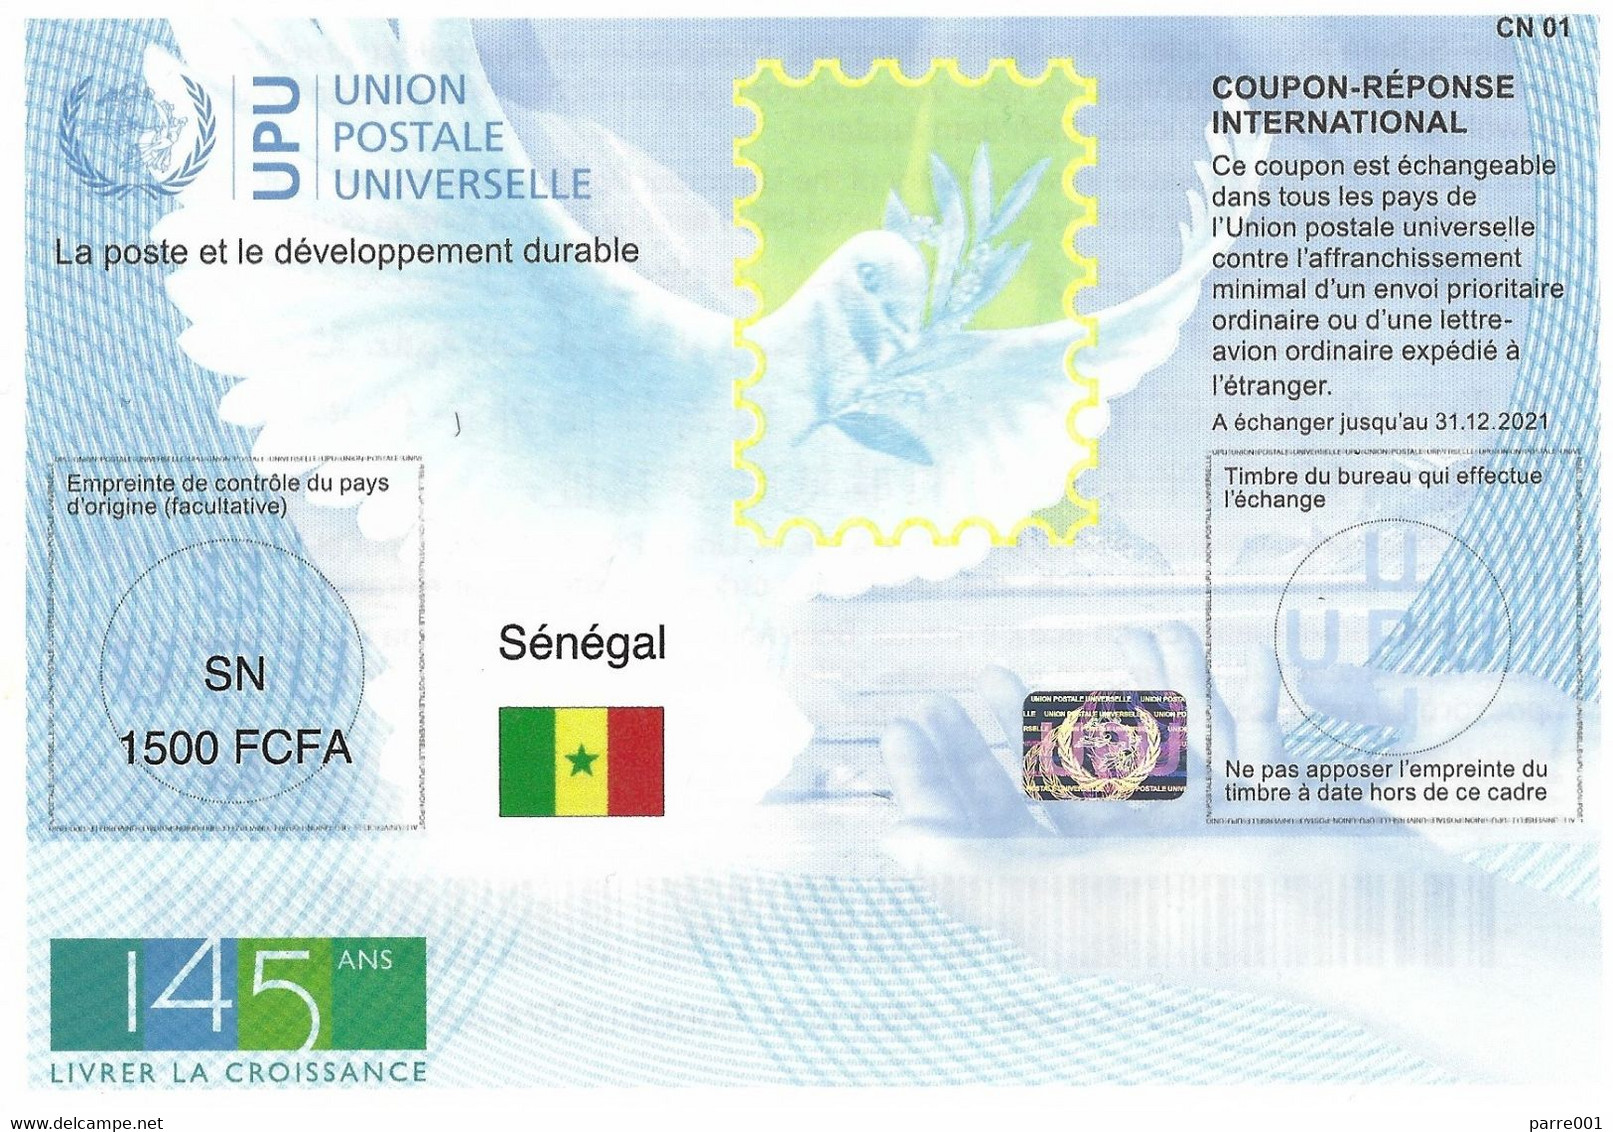 Senegal 2019 Reply Coupon Reponse 145 Ans UPU Hologram Type T37 IRC IAS Antwortschein - UPU (Union Postale Universelle)